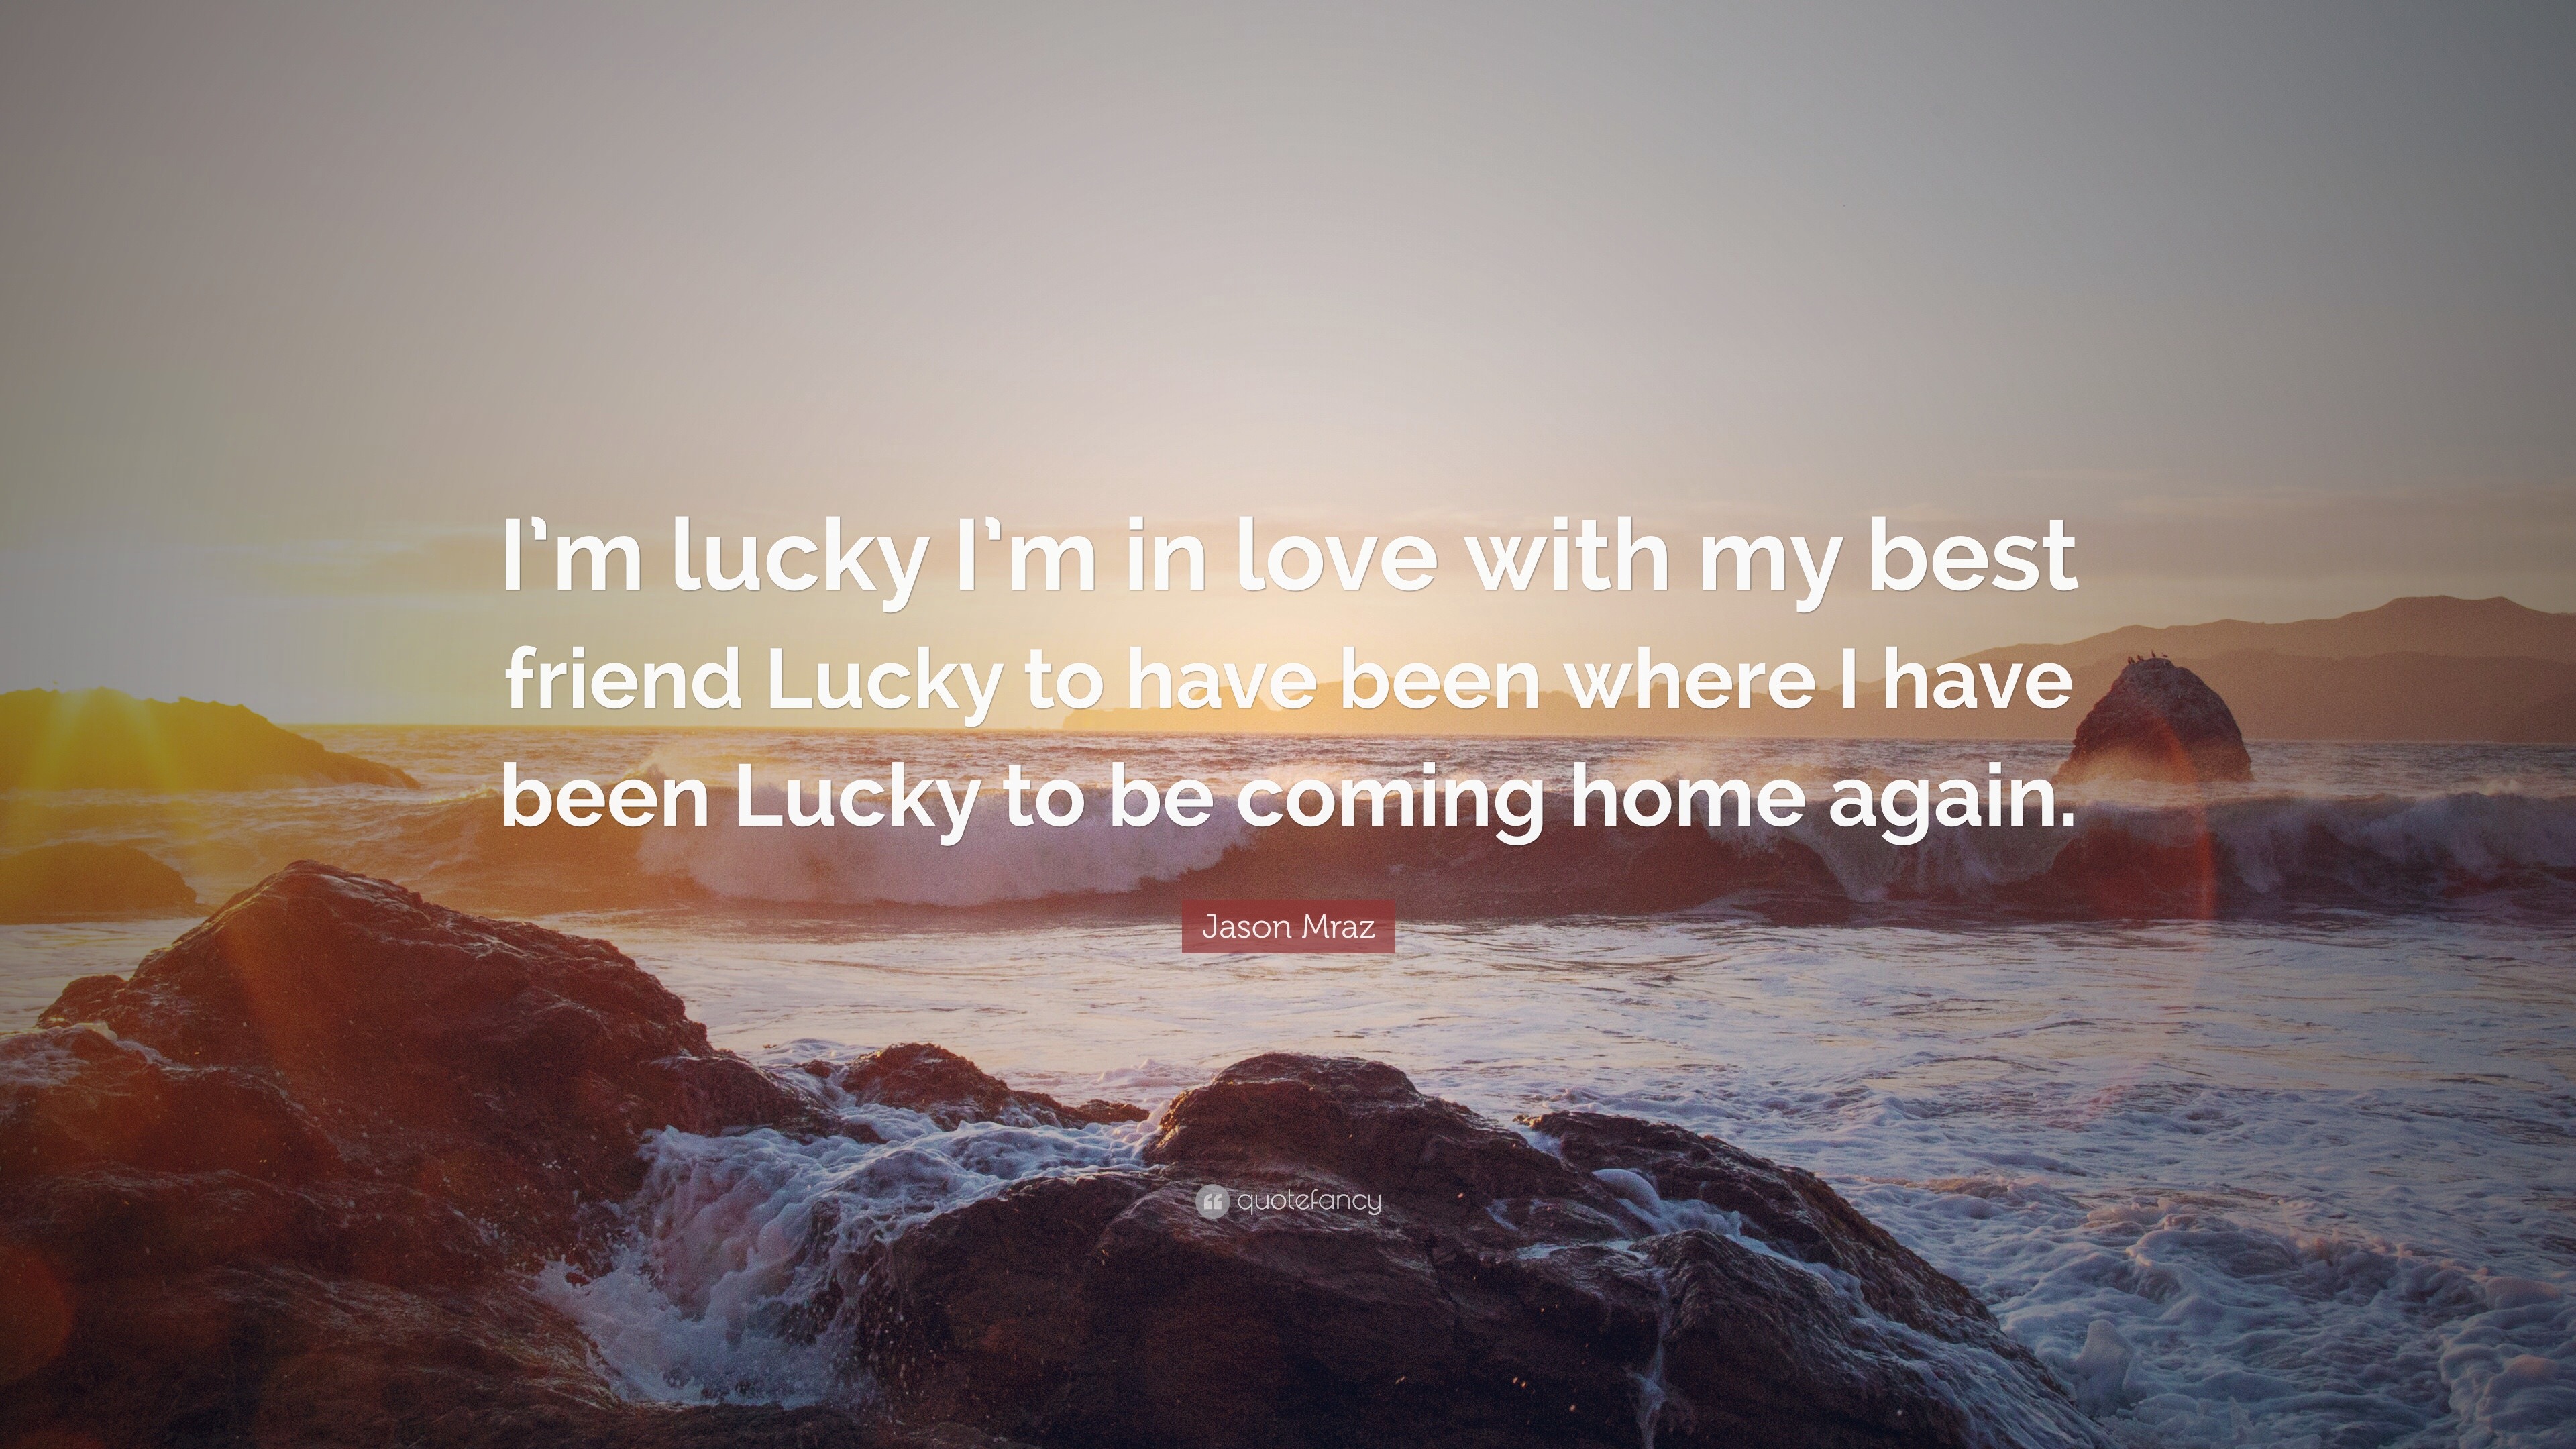 Jason Mraz Quote “I m lucky I m in love with my